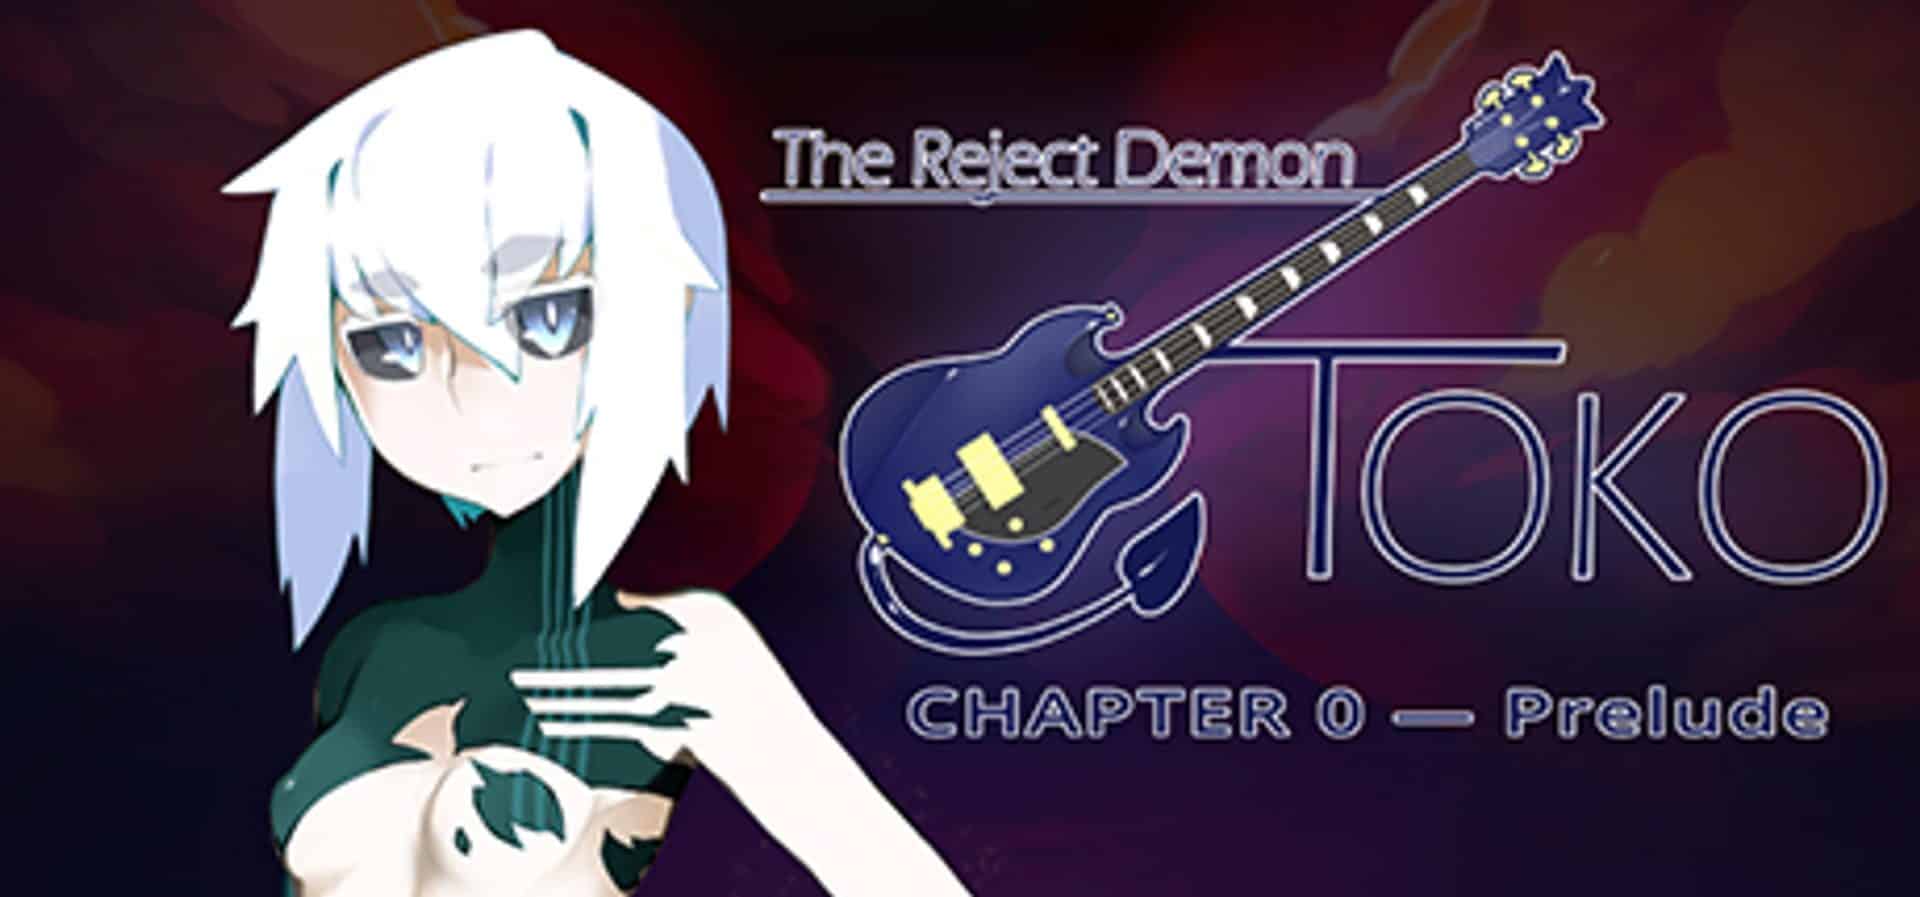 The Reject Demon: Toko Chapter 0 - Prelude